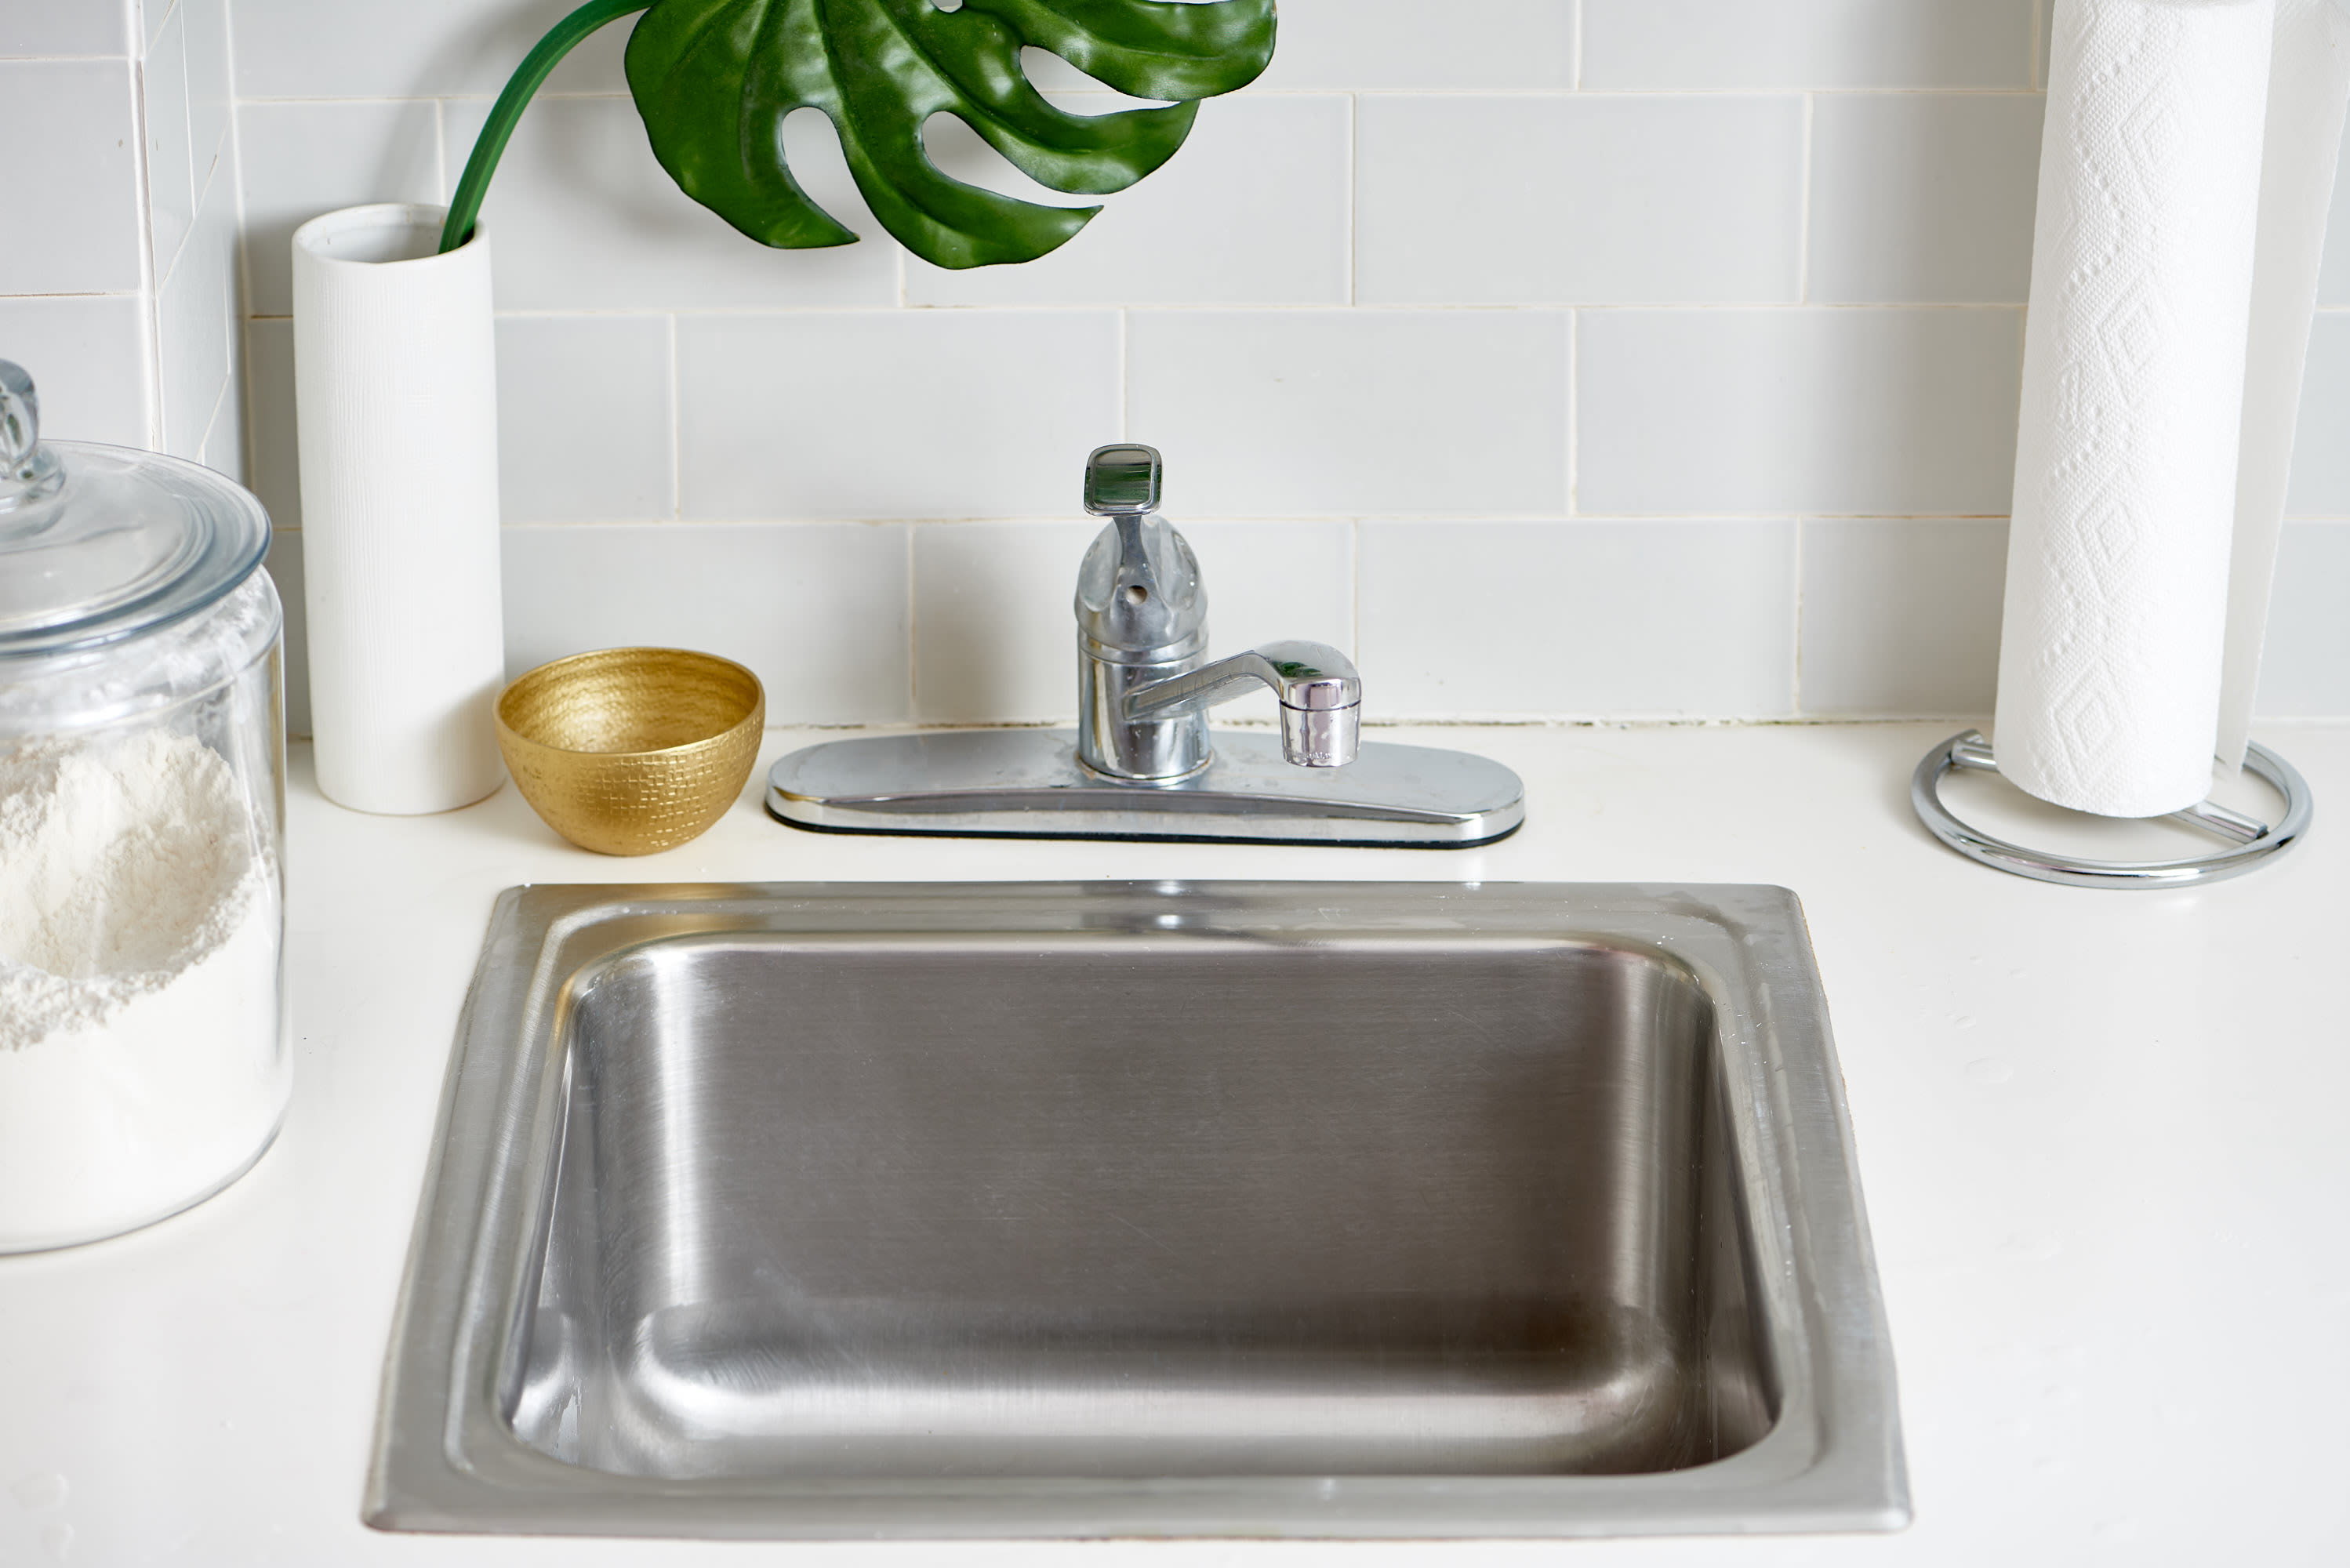 How To Polish A Stainless Steel Sink With Flour Kitchn